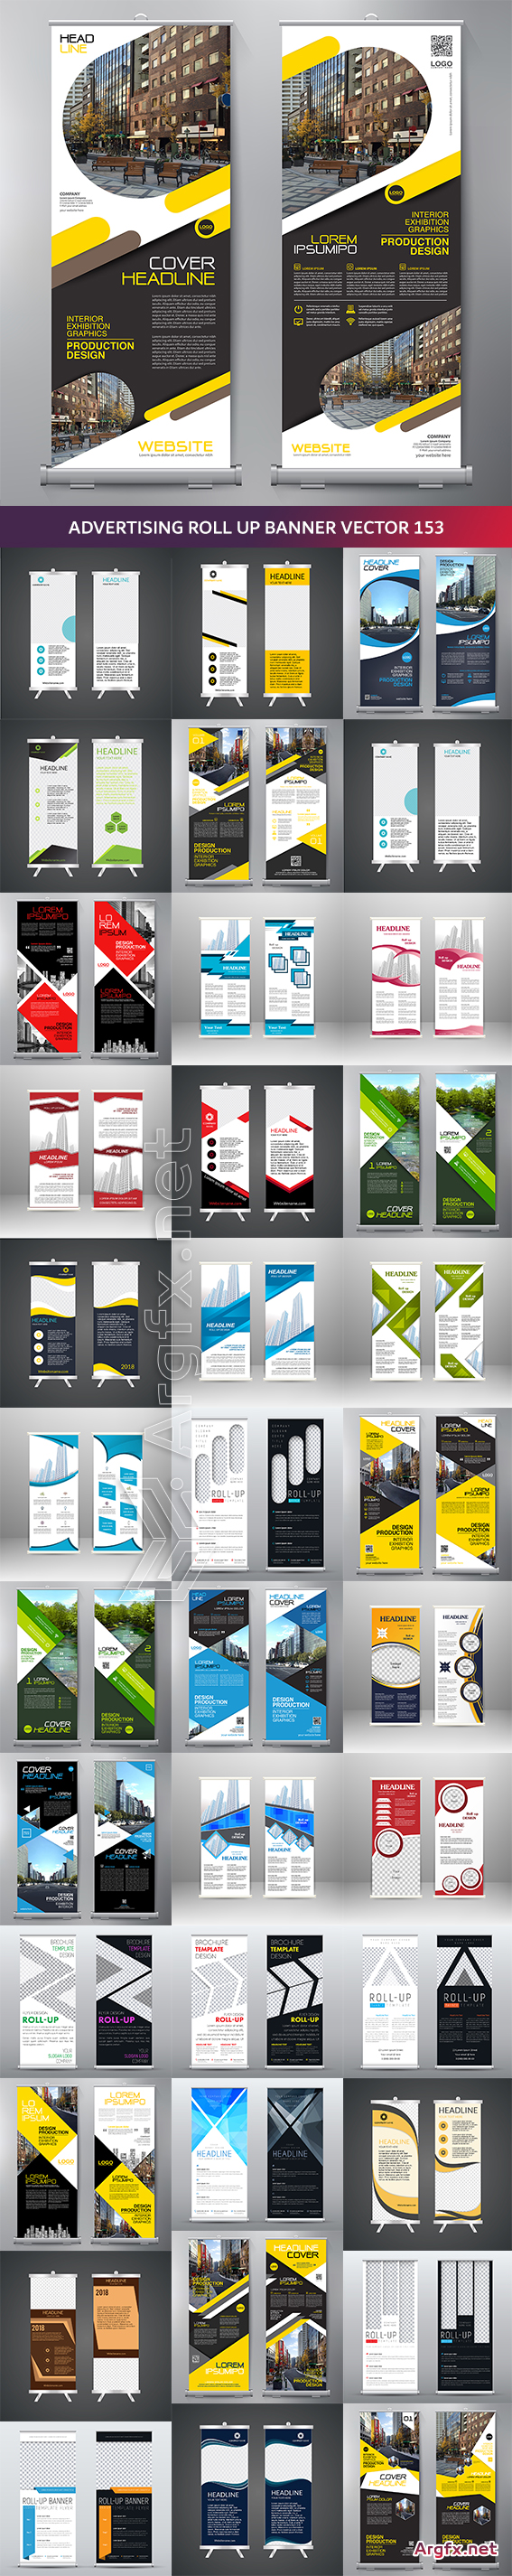 Advertising Roll up banner vector 153